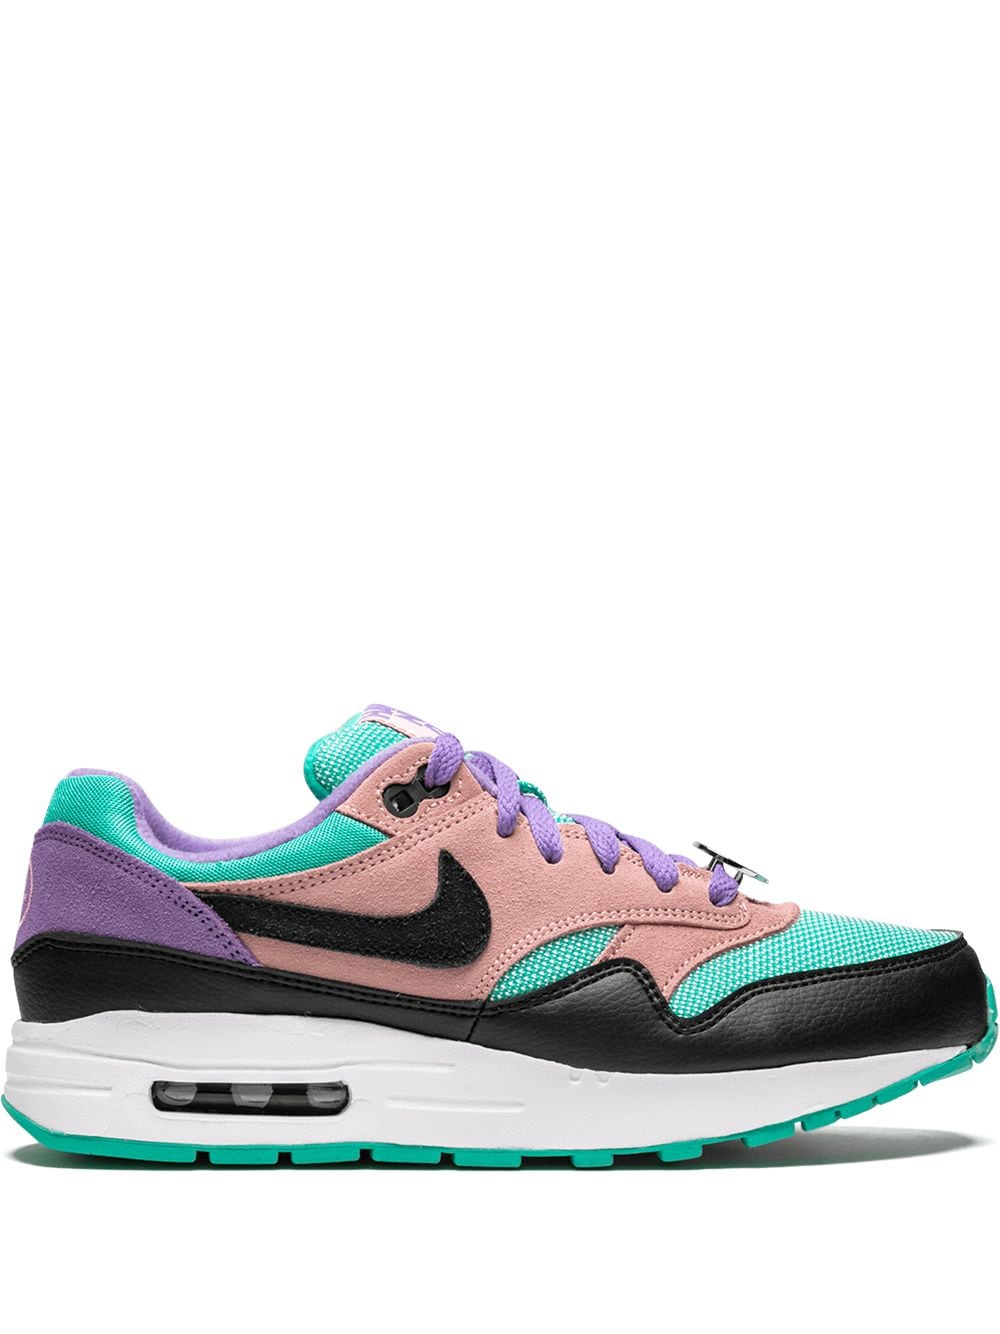 Nike Kids Air Max 1 "Have A Nike Day" sneakers - Green von Nike Kids